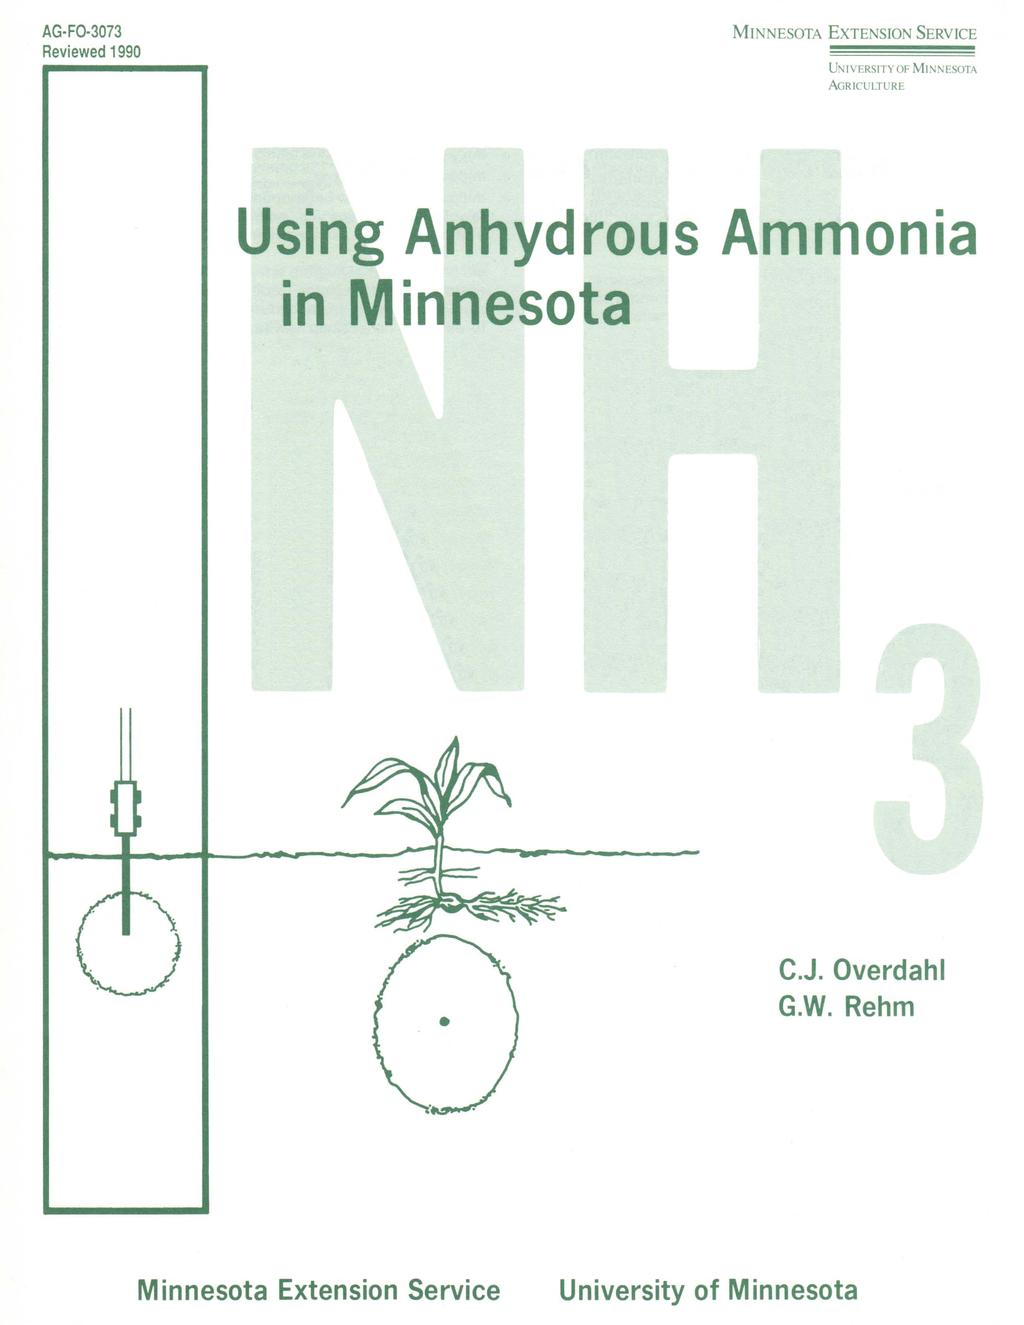 AG FO 3073 Reviewed 1990 MINNESOTA EXTENSION SERVICE U NIVERSITY OF M INNESOTA A GRICULTURE Using